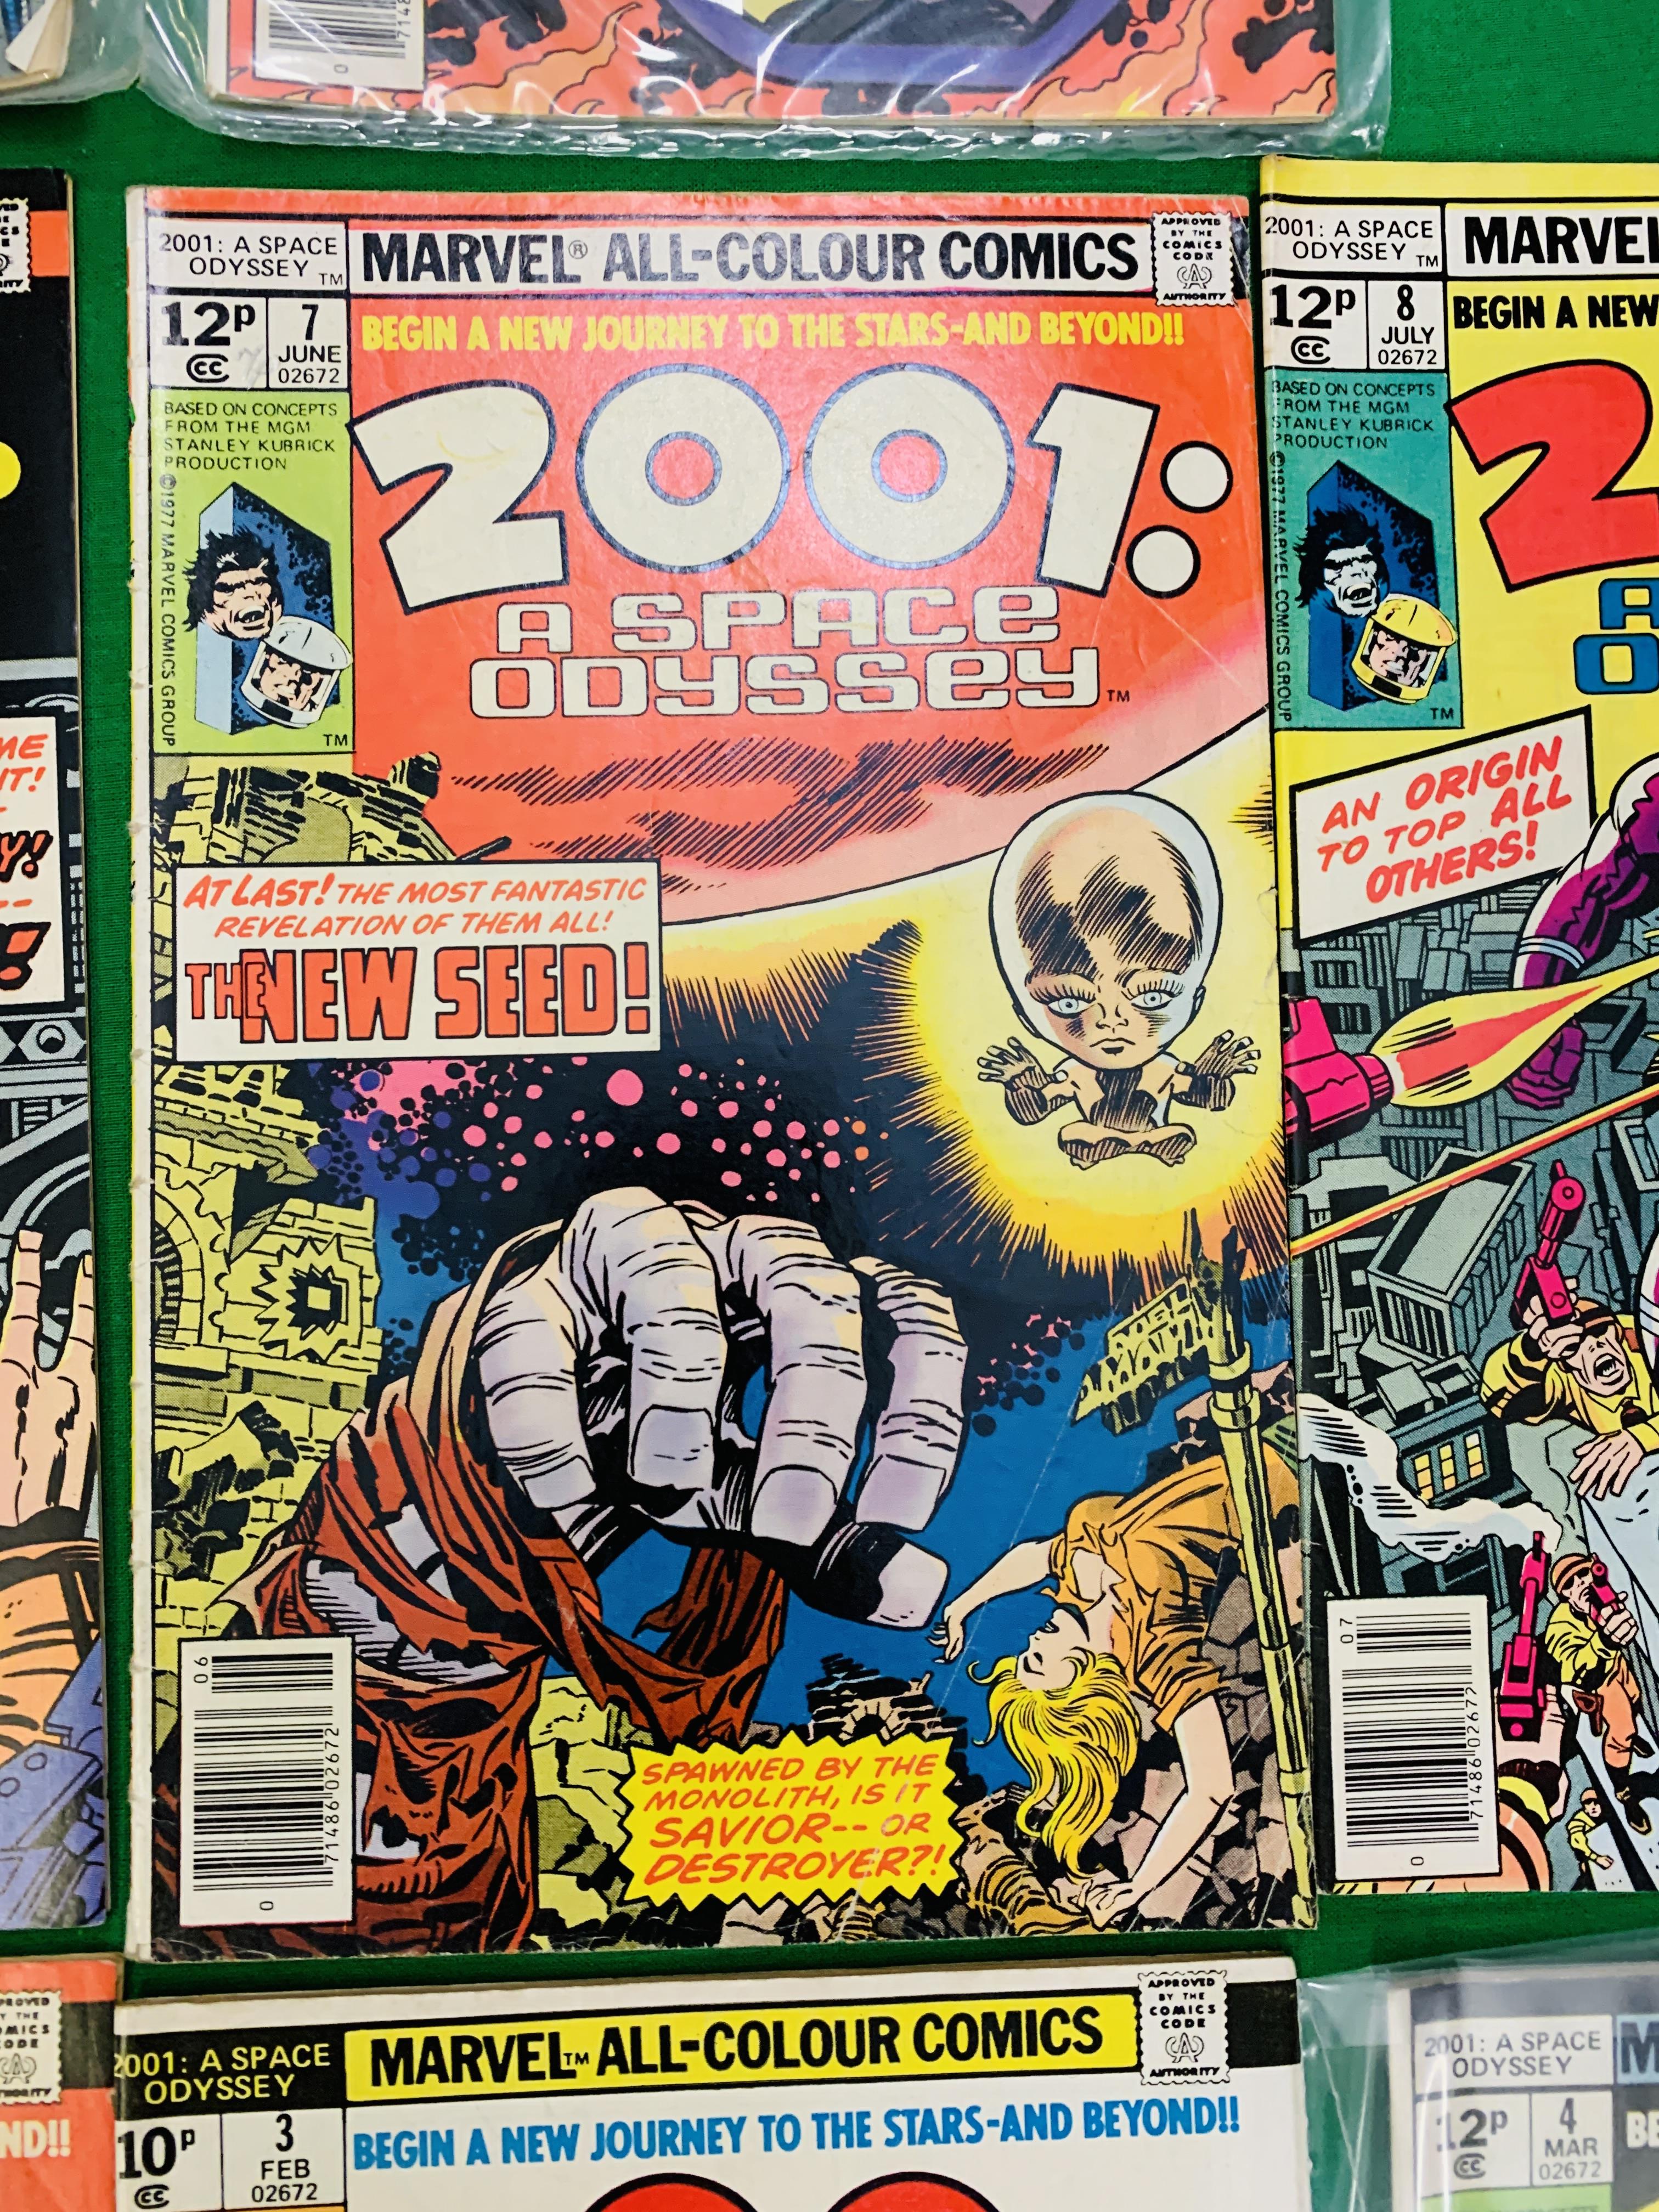 MARVEL COMICS 2001: A SPACE ODYSSEY NO. 1 - 10 FROM 1976, FIRST APPEARANCE NO. 8. MACHINE MAN X-51. - Image 8 of 11